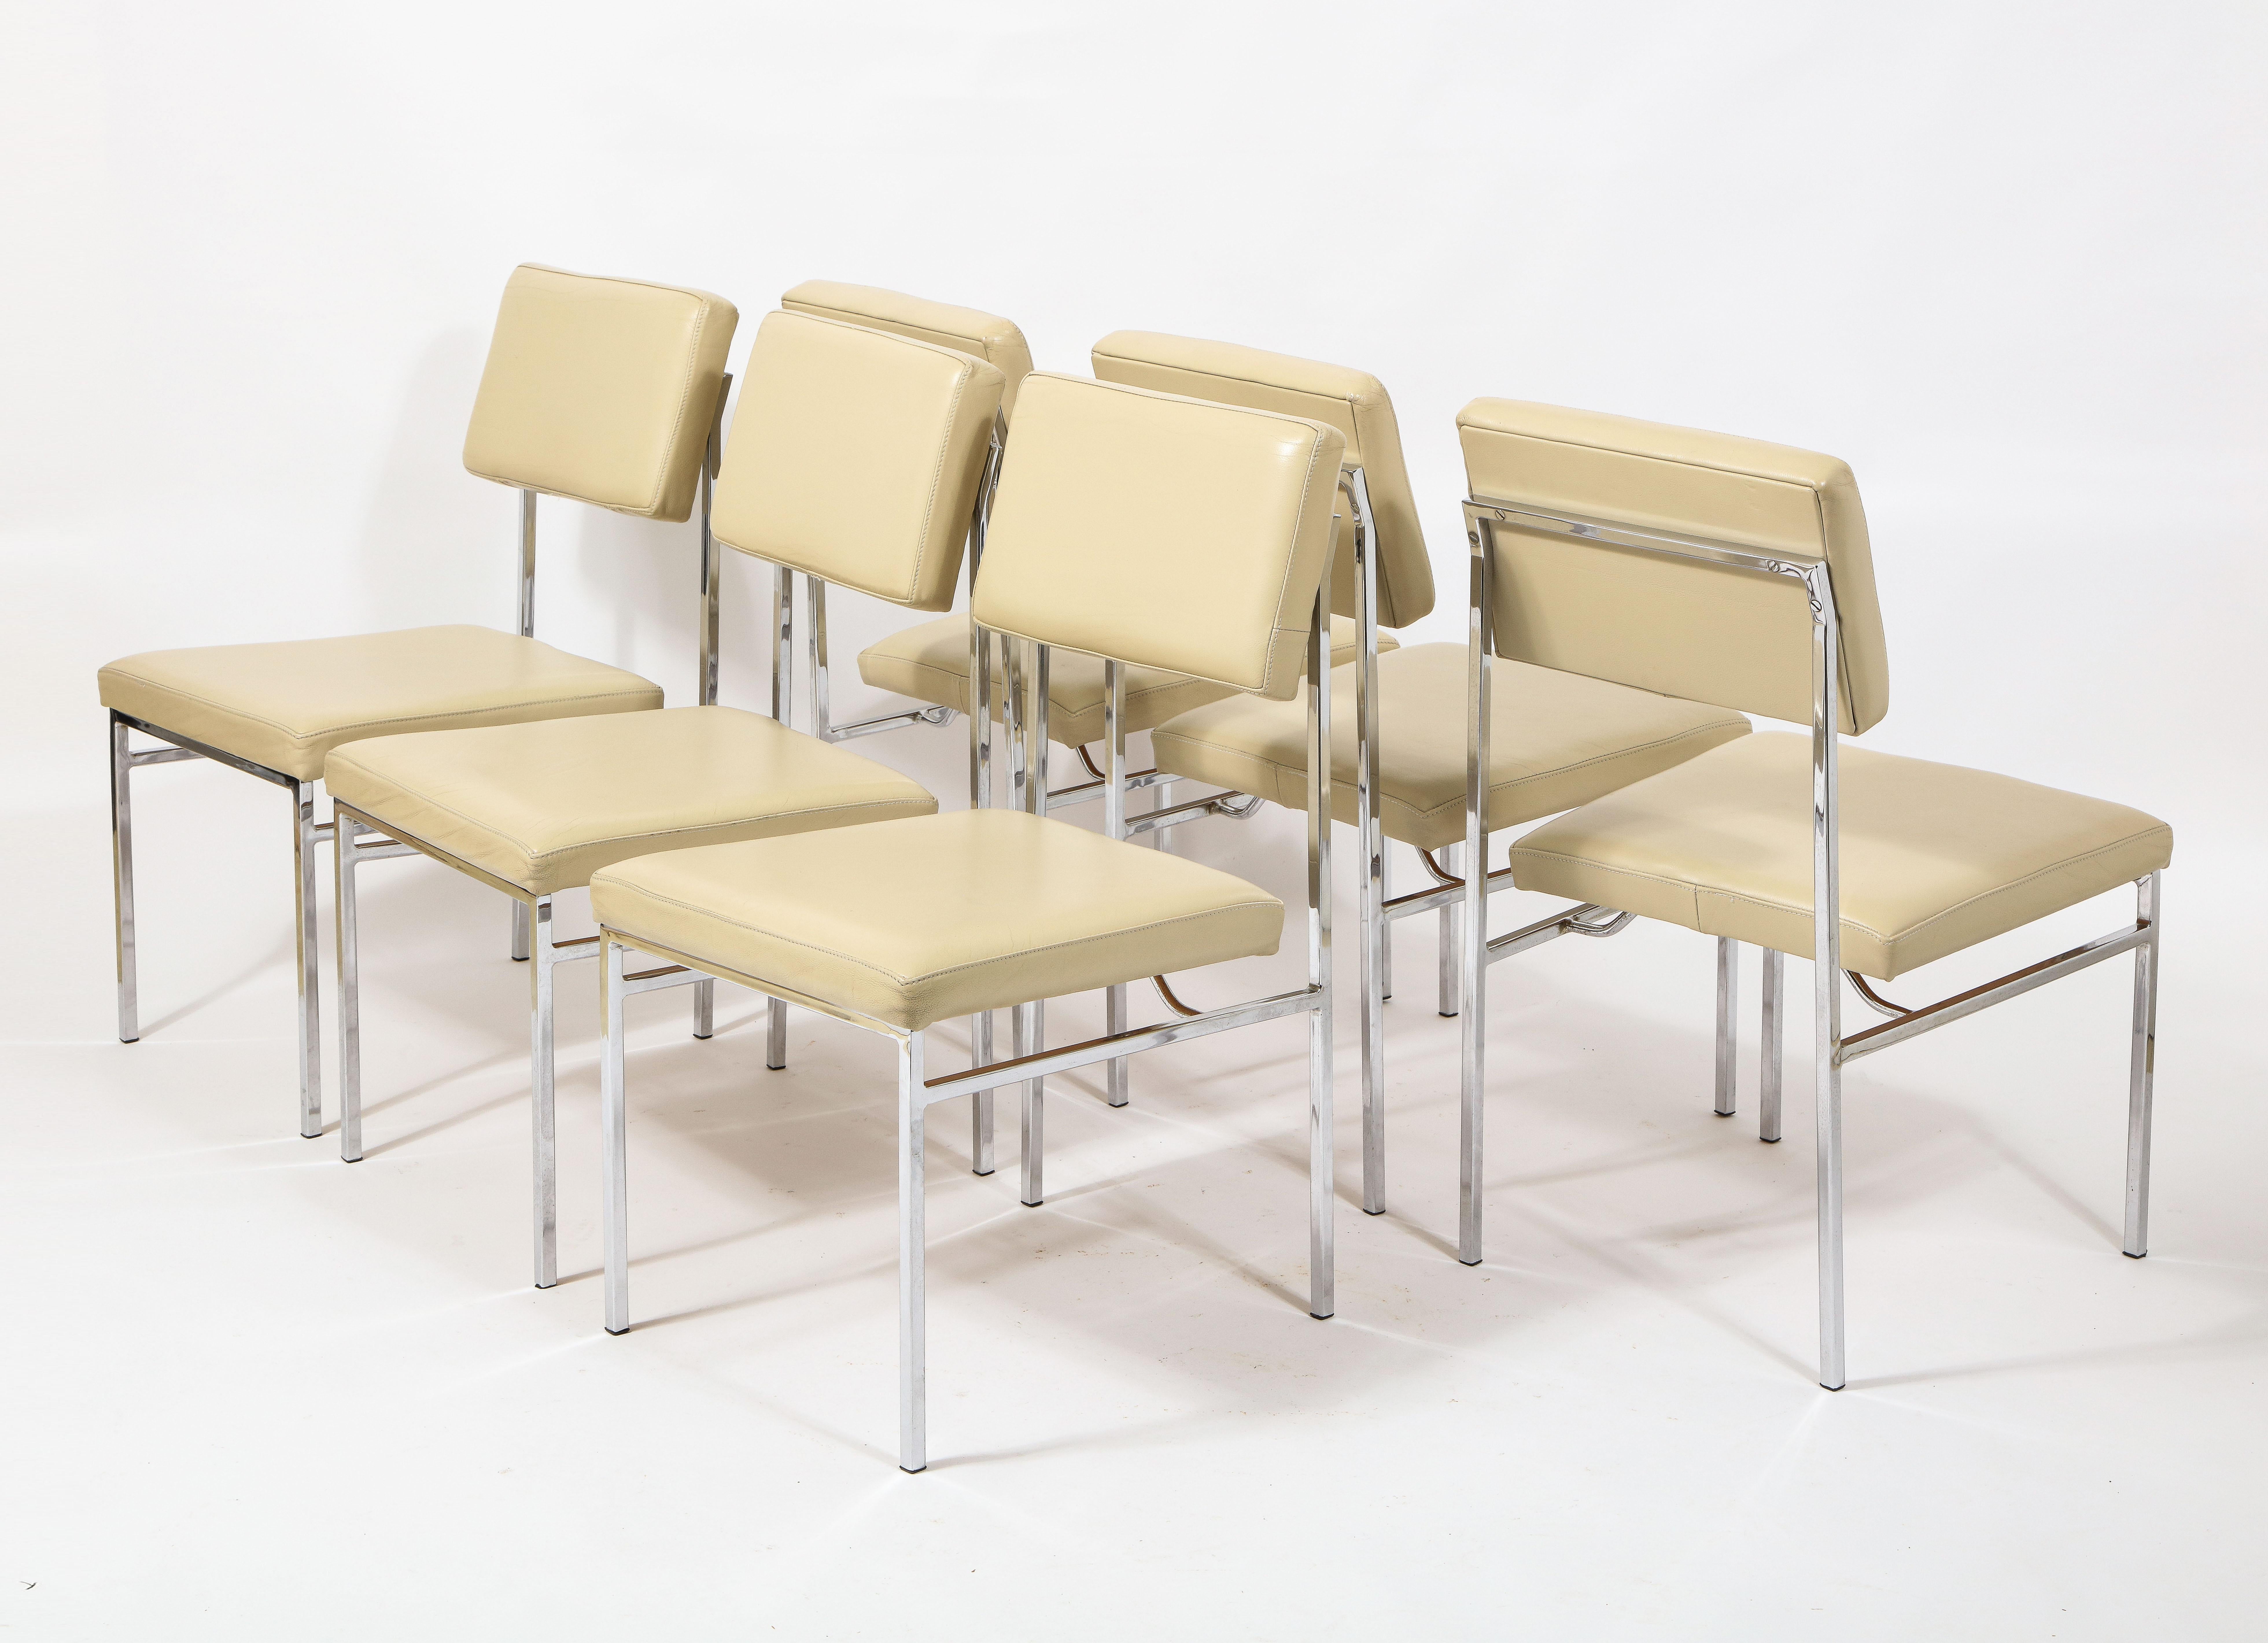 Iconic Model P60 chair designed by Antoine Philippon & Jacqueline Lecoq for Airborne. Consisting of a quadrangular base in chromed steel which supports a seat and a backrest upholstered and covered with period cream leather.